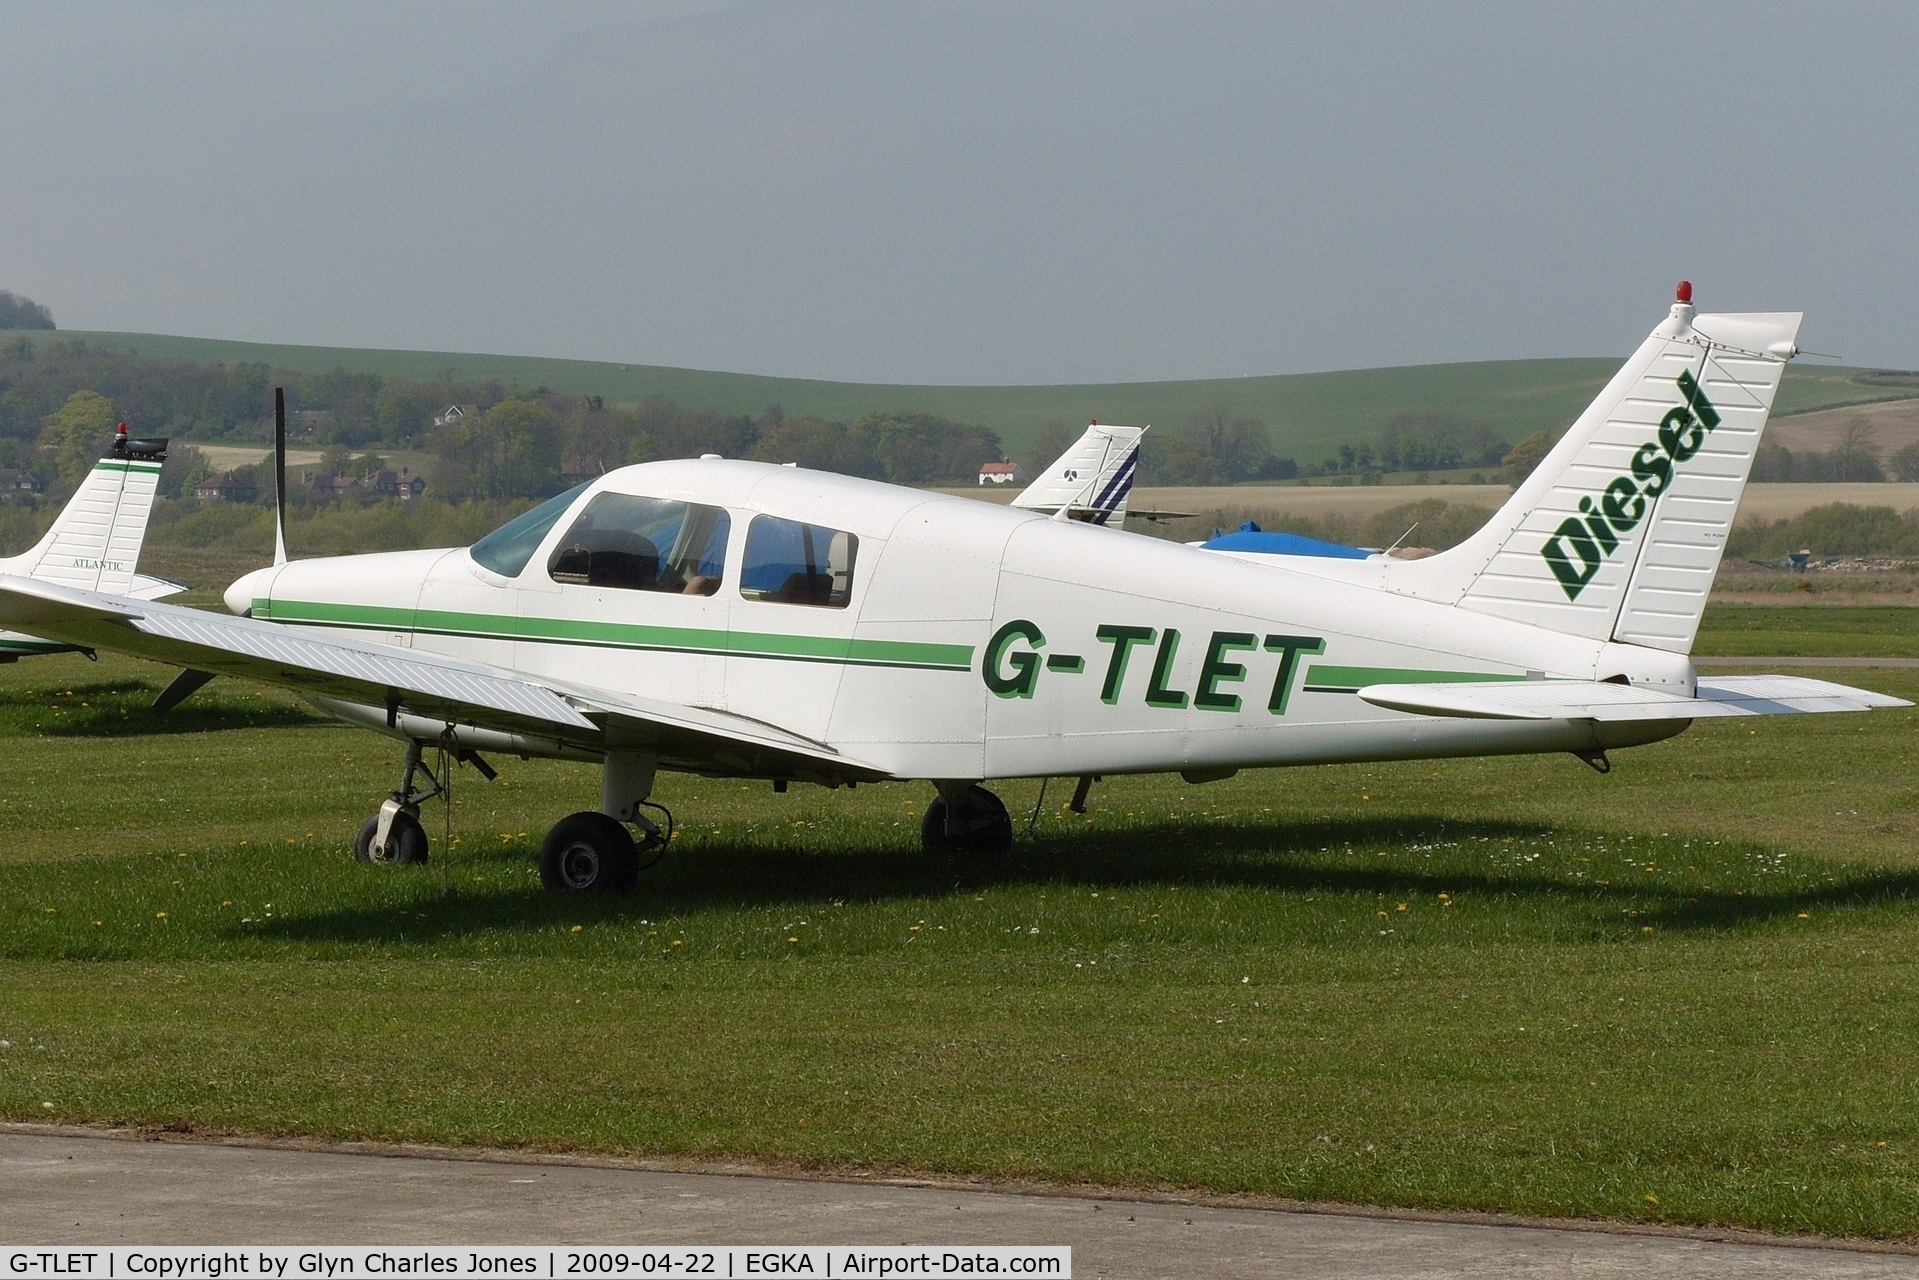 G-TLET, 1989 Piper PA-28-161 Cadet C/N 2841259, Previously G-GFCF and G-RHBH. Owned by ADR Aviation.